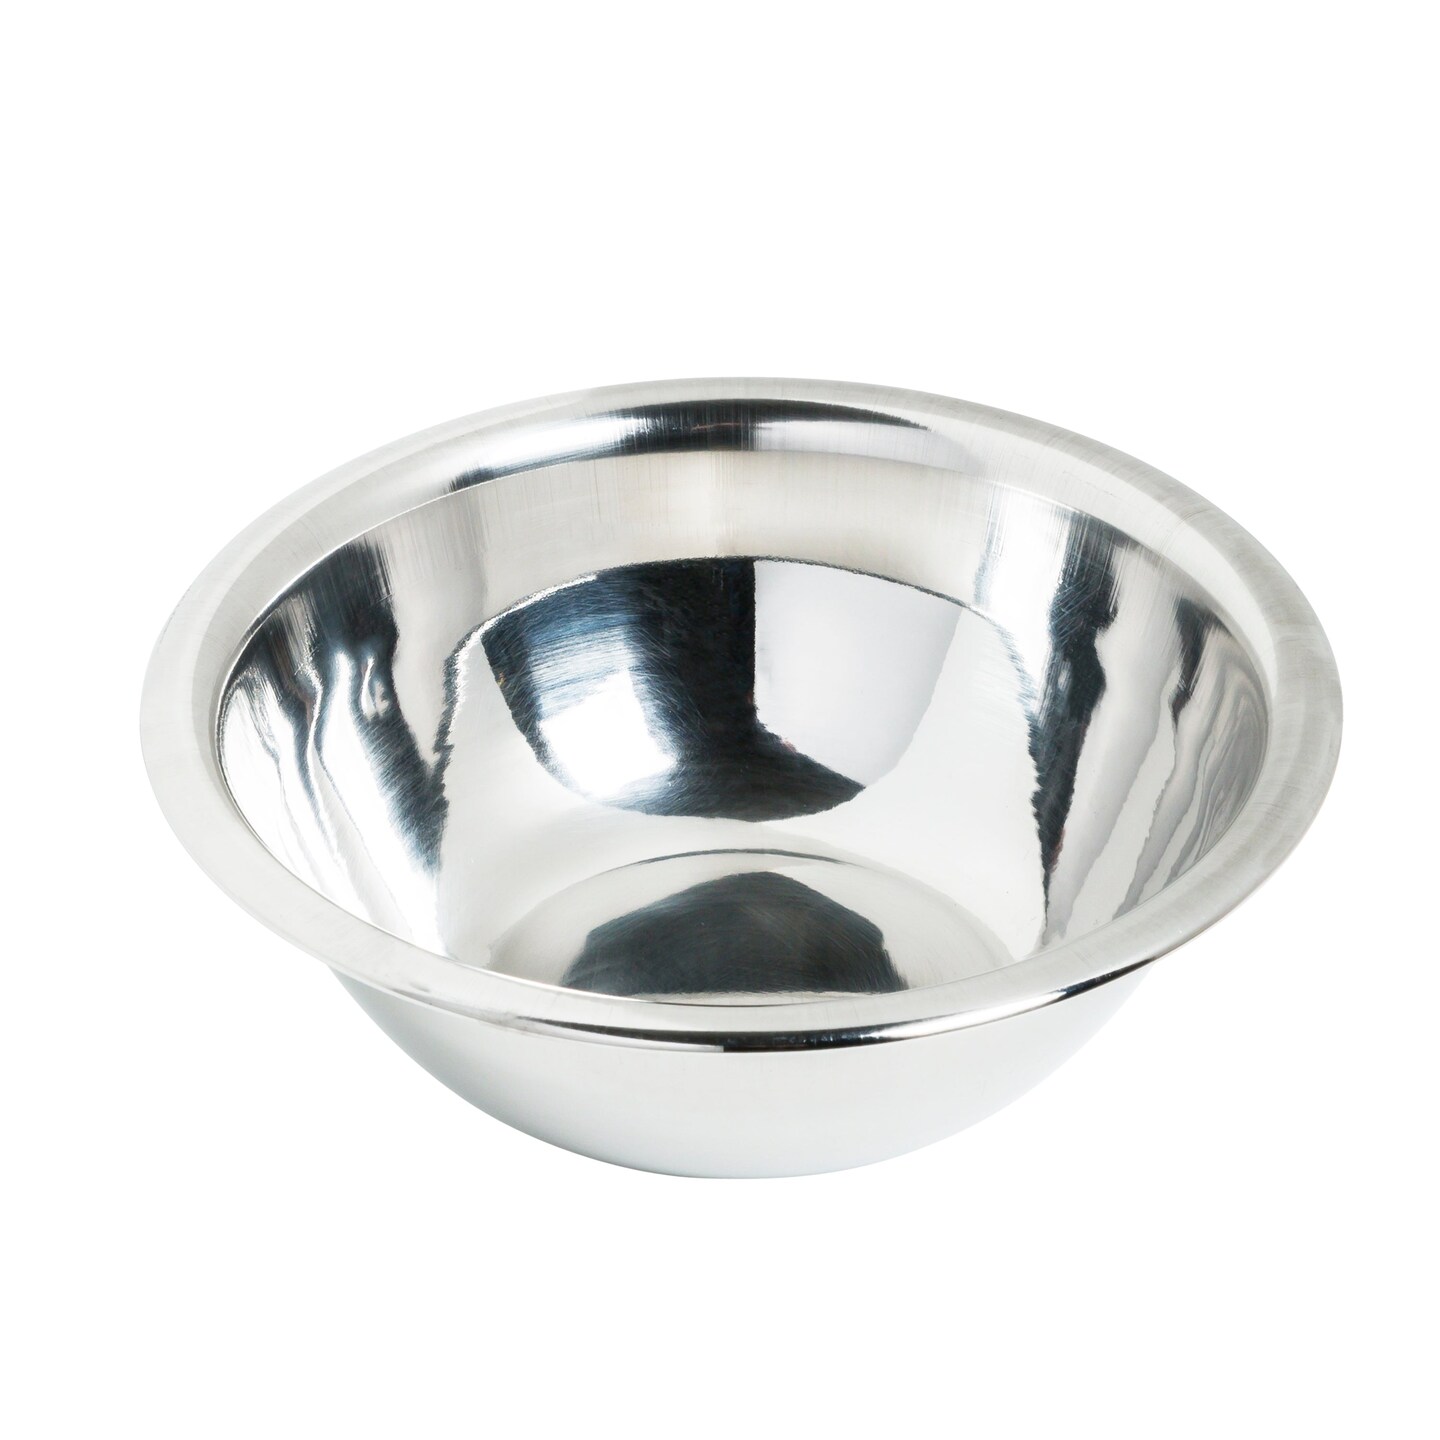 0.75 Qt Stainless Steel Mixing Bowl, Small 3-Cup Capacity